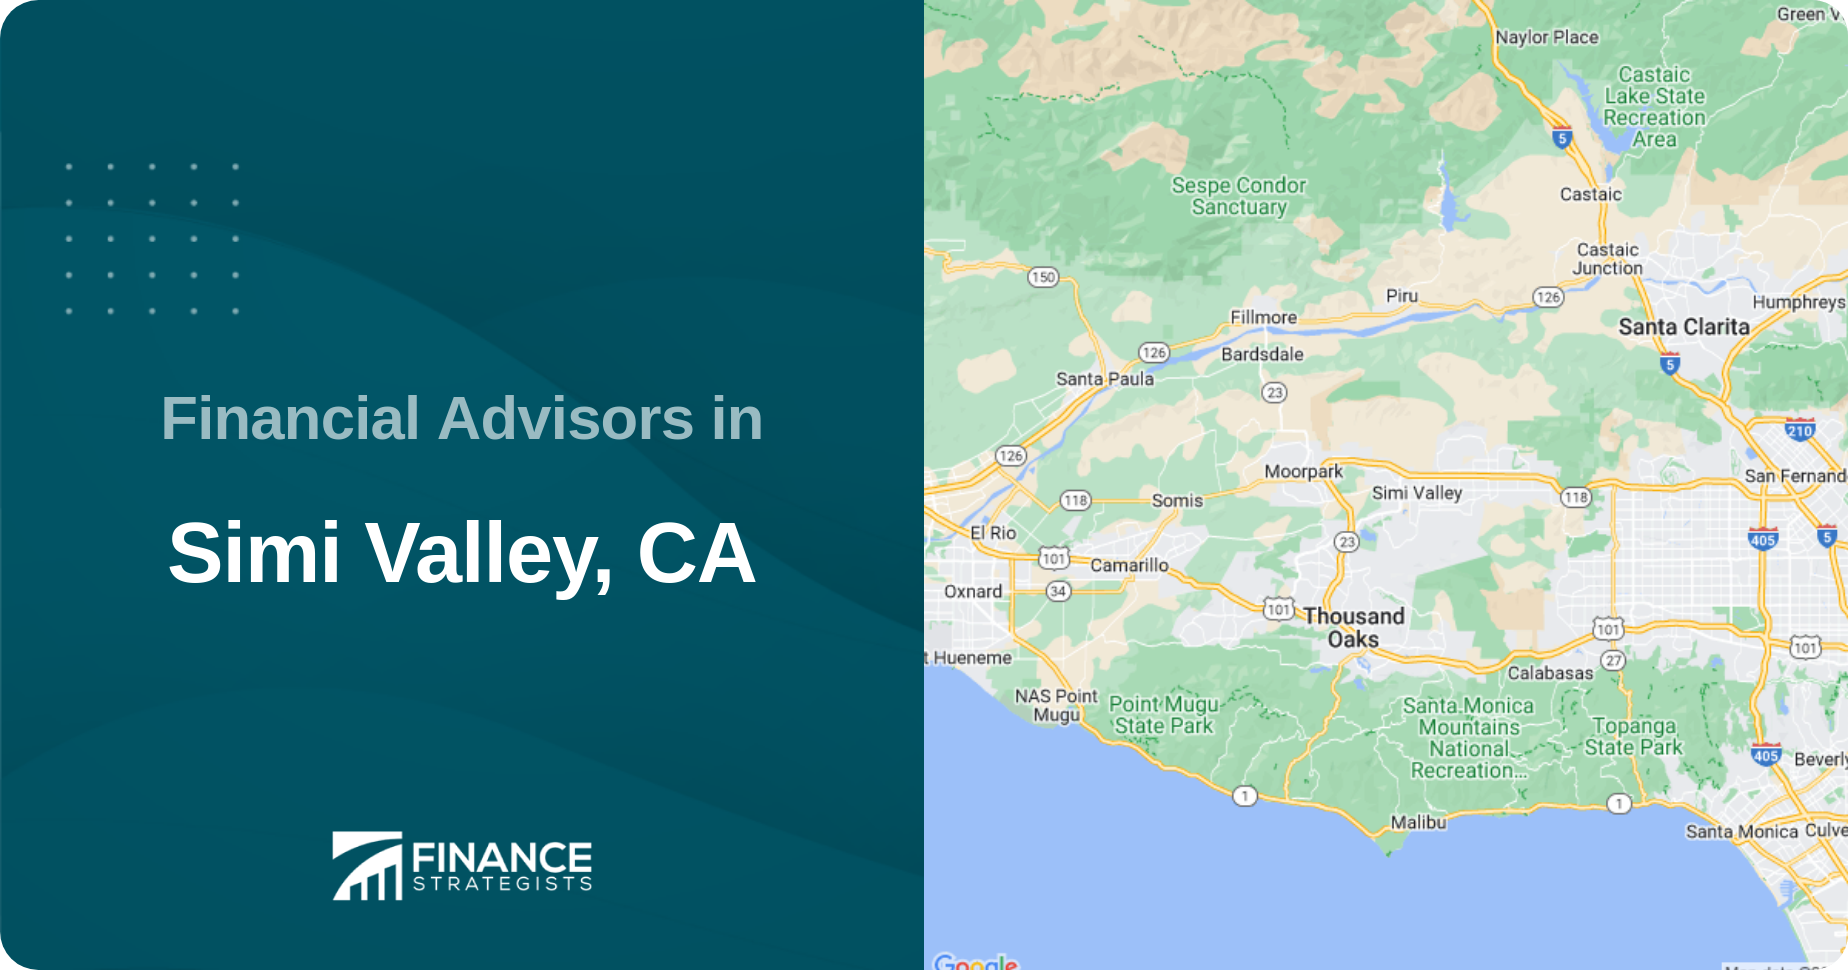 Financial Advisors in Simi Valley, CA